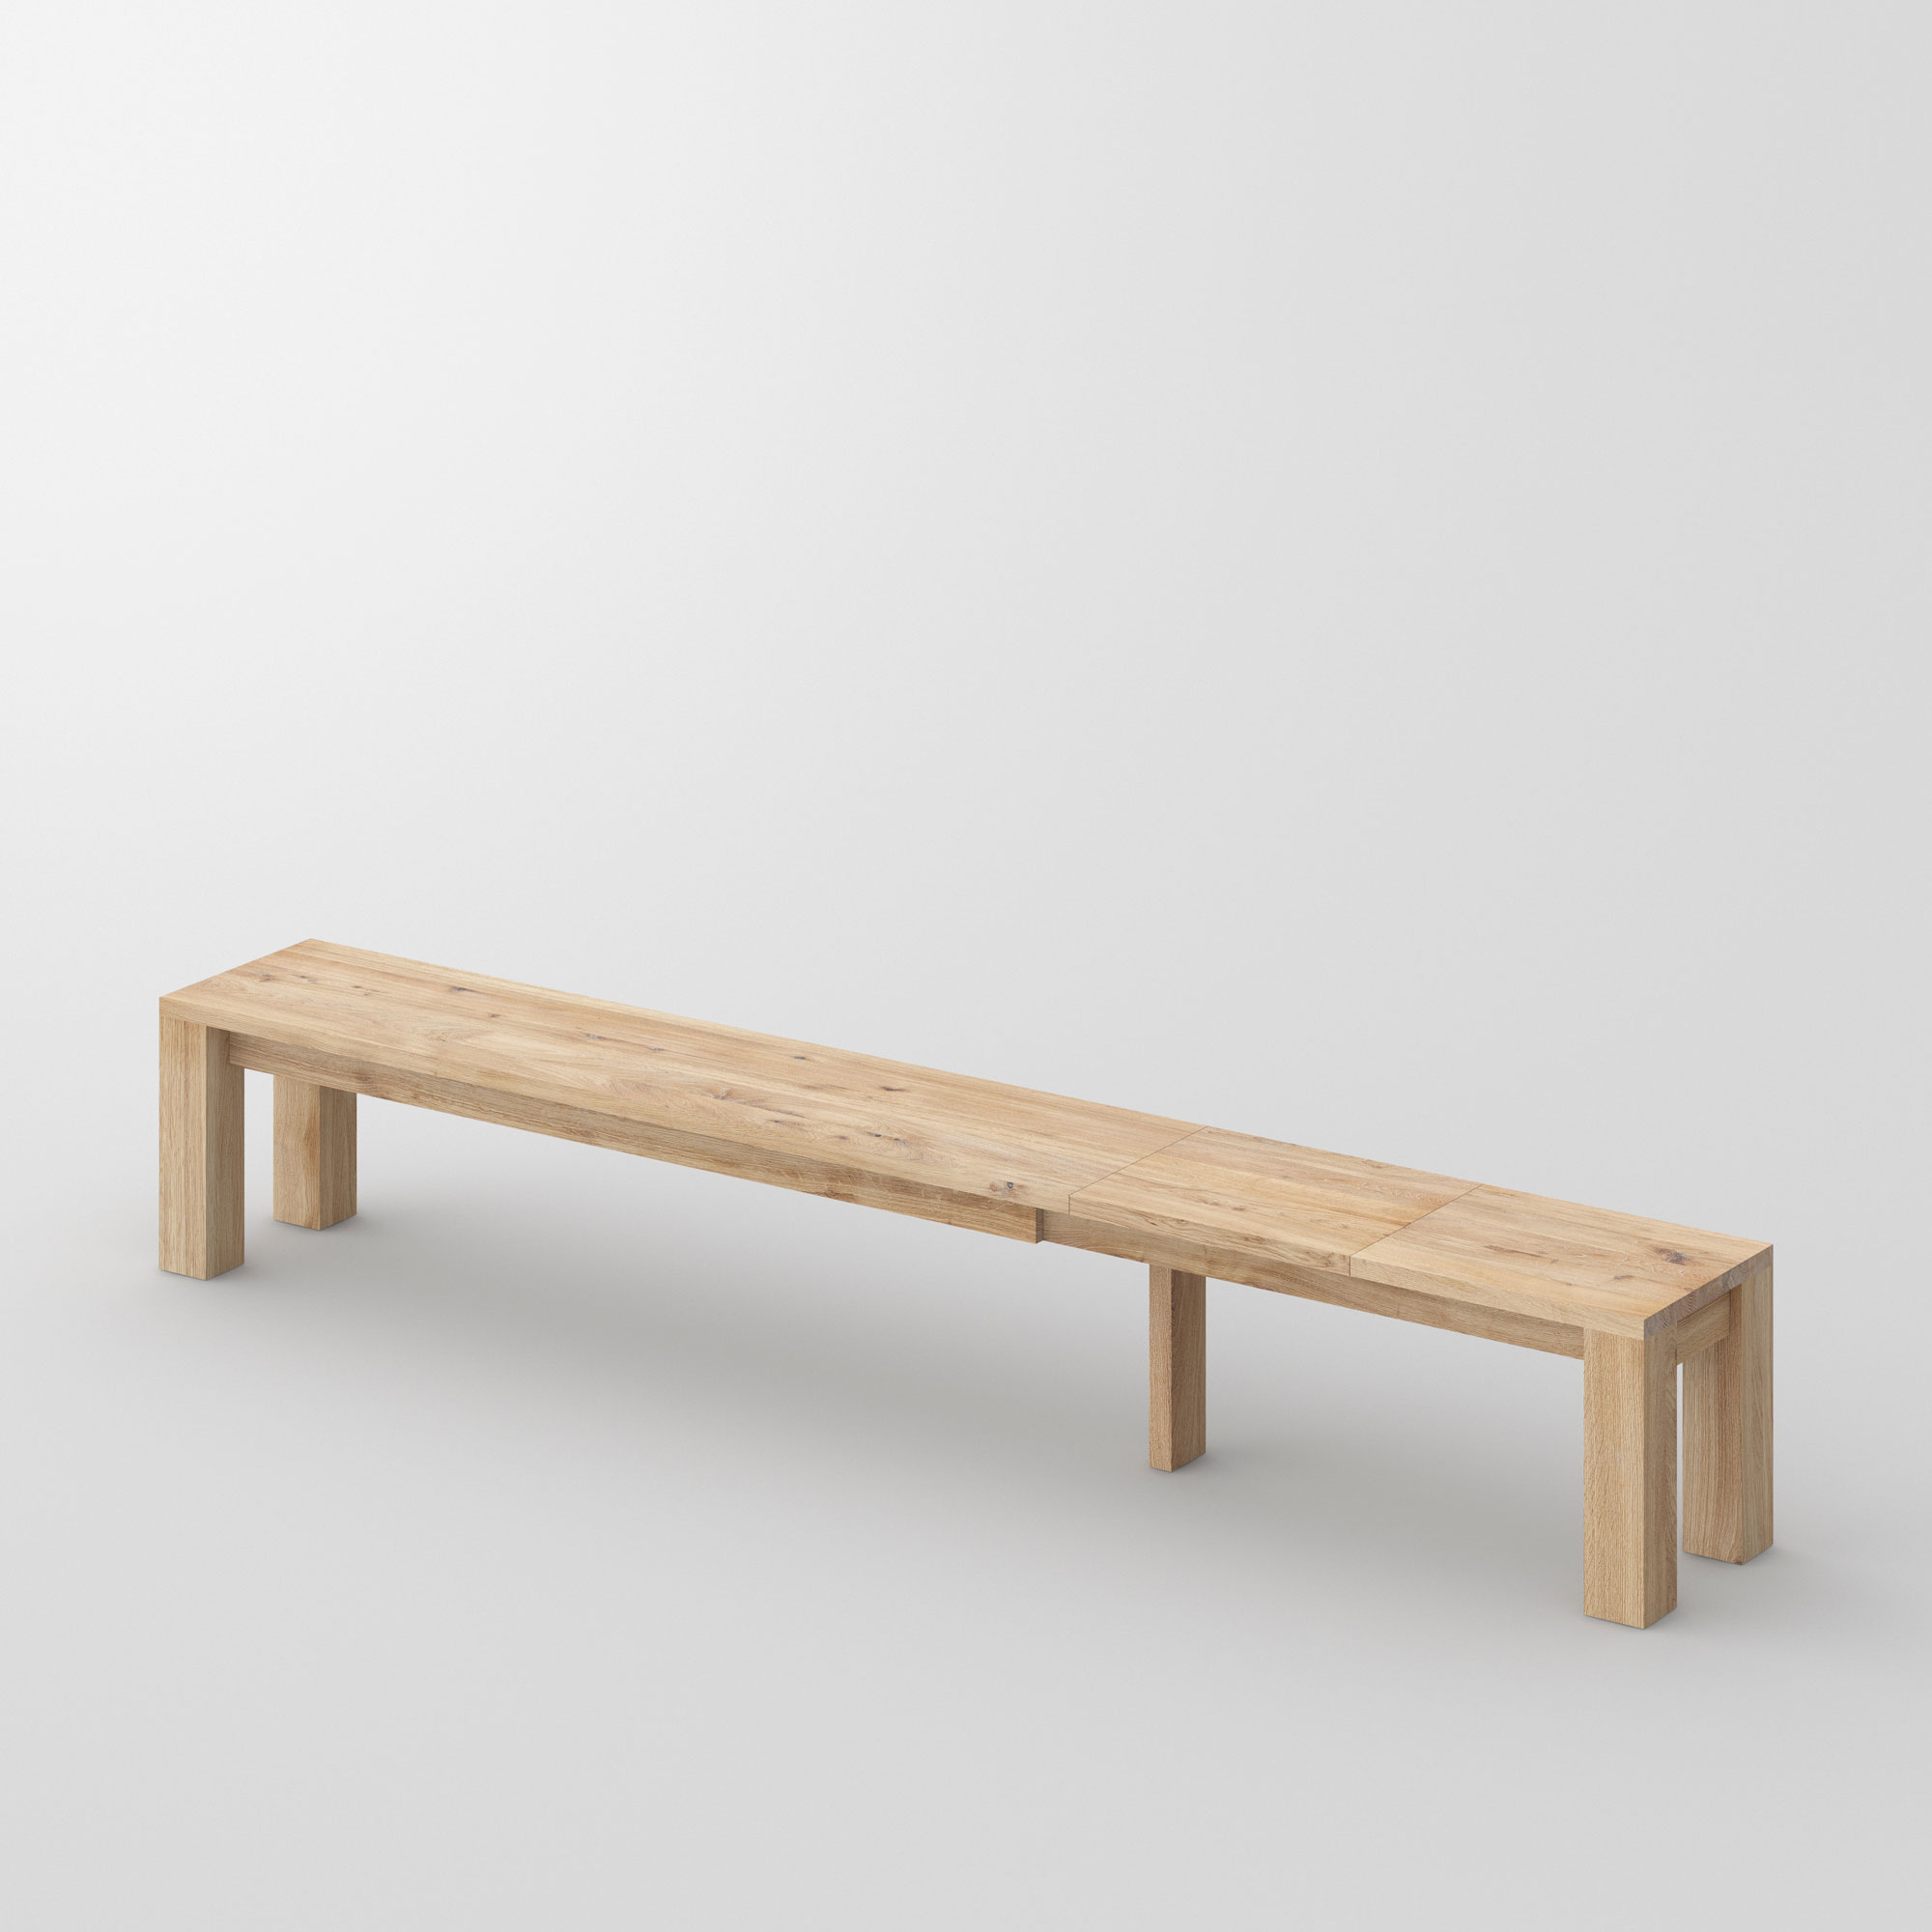 Extendable Bench CUBUS EP 3 cam1 custom made in solid wood by vitamin design